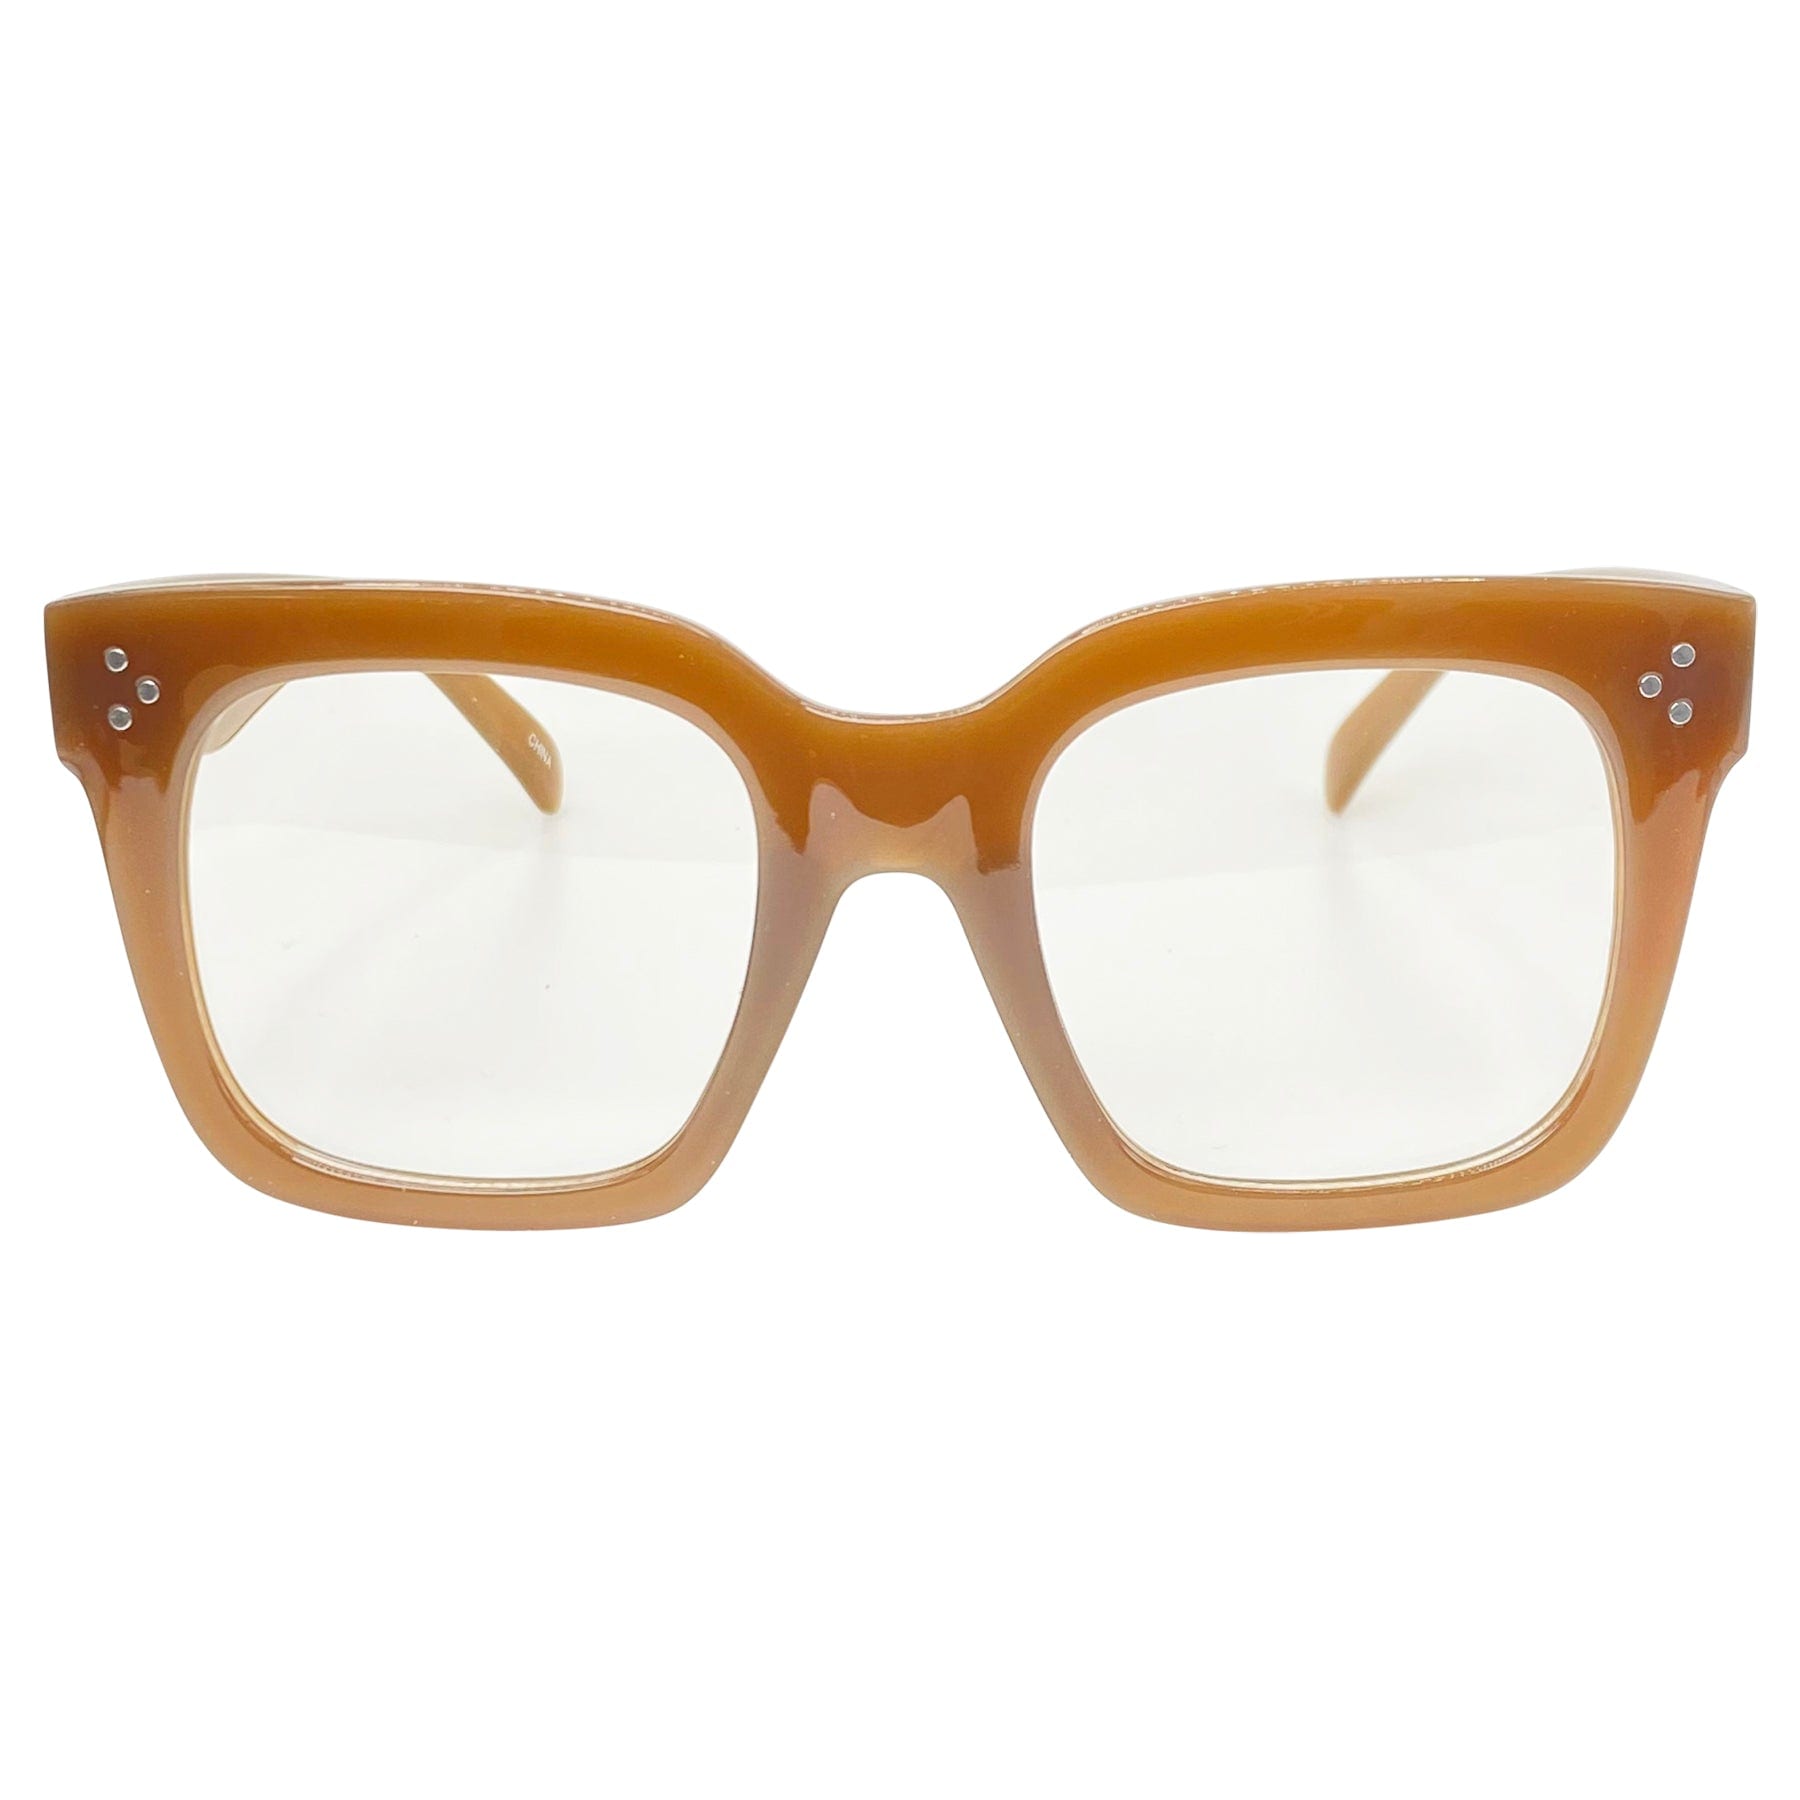 clear glasses men and women with a square brown frame 